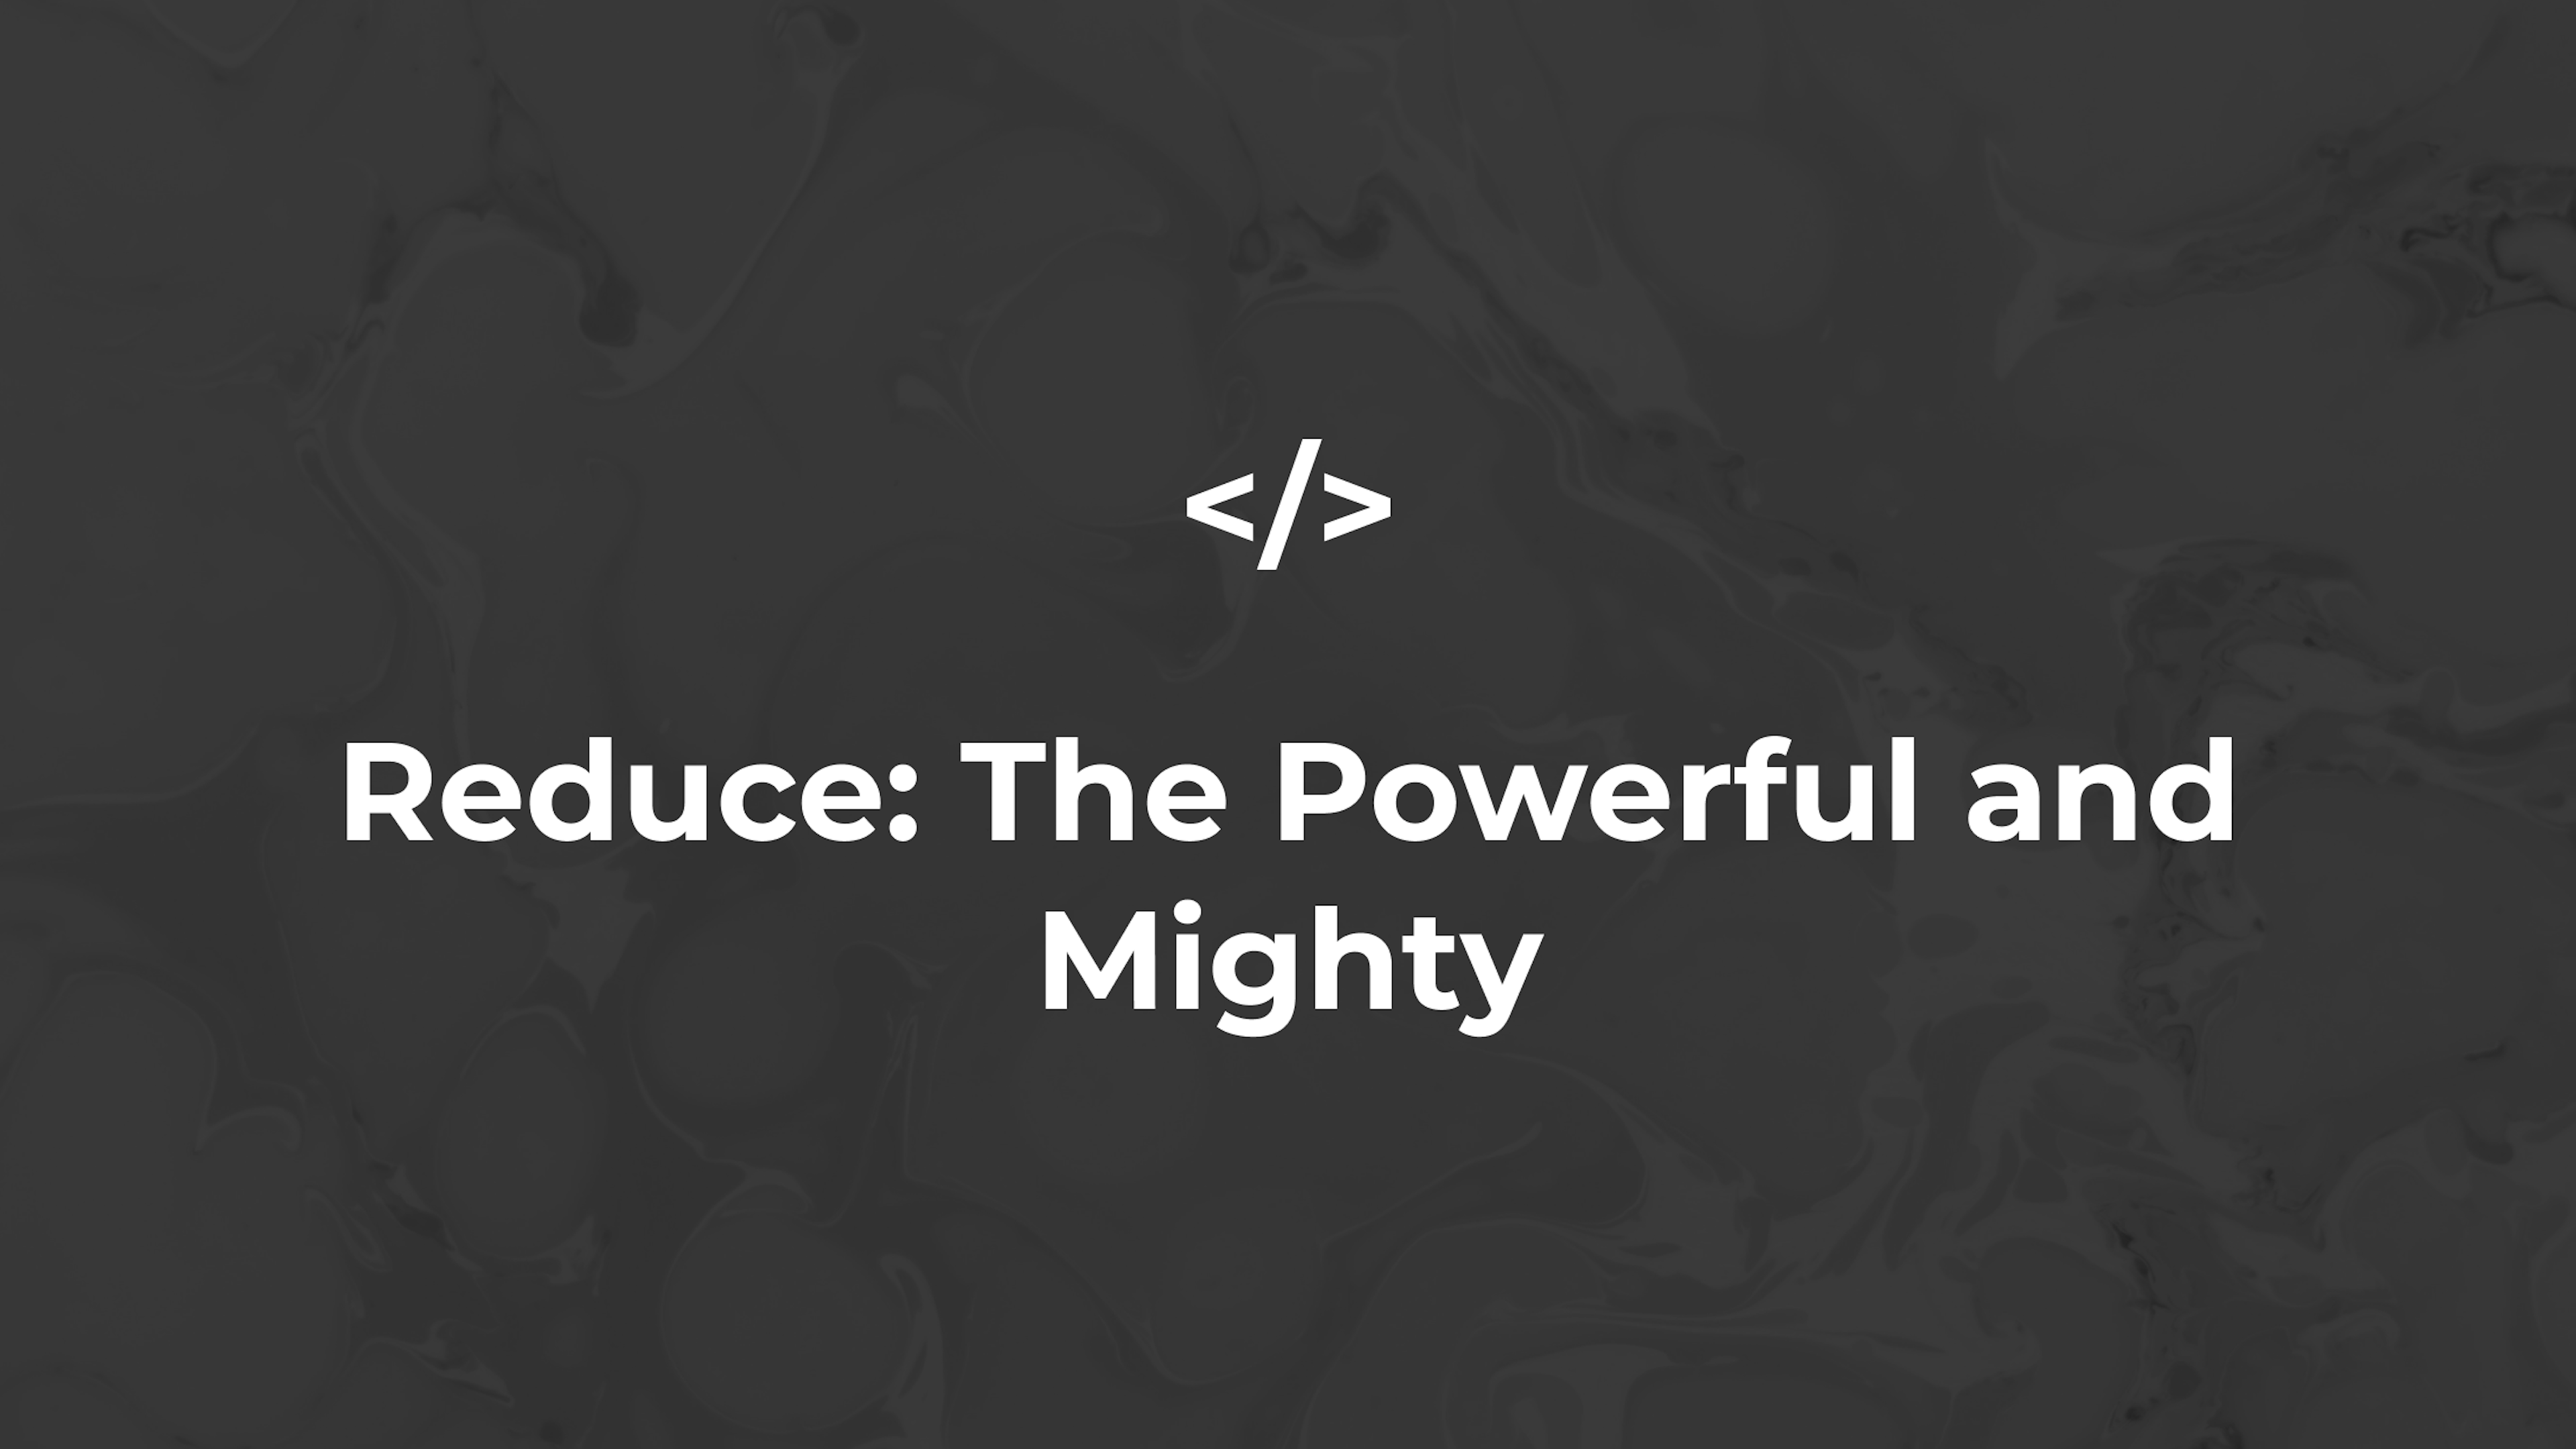 Reduce: The Powerful and Mighty